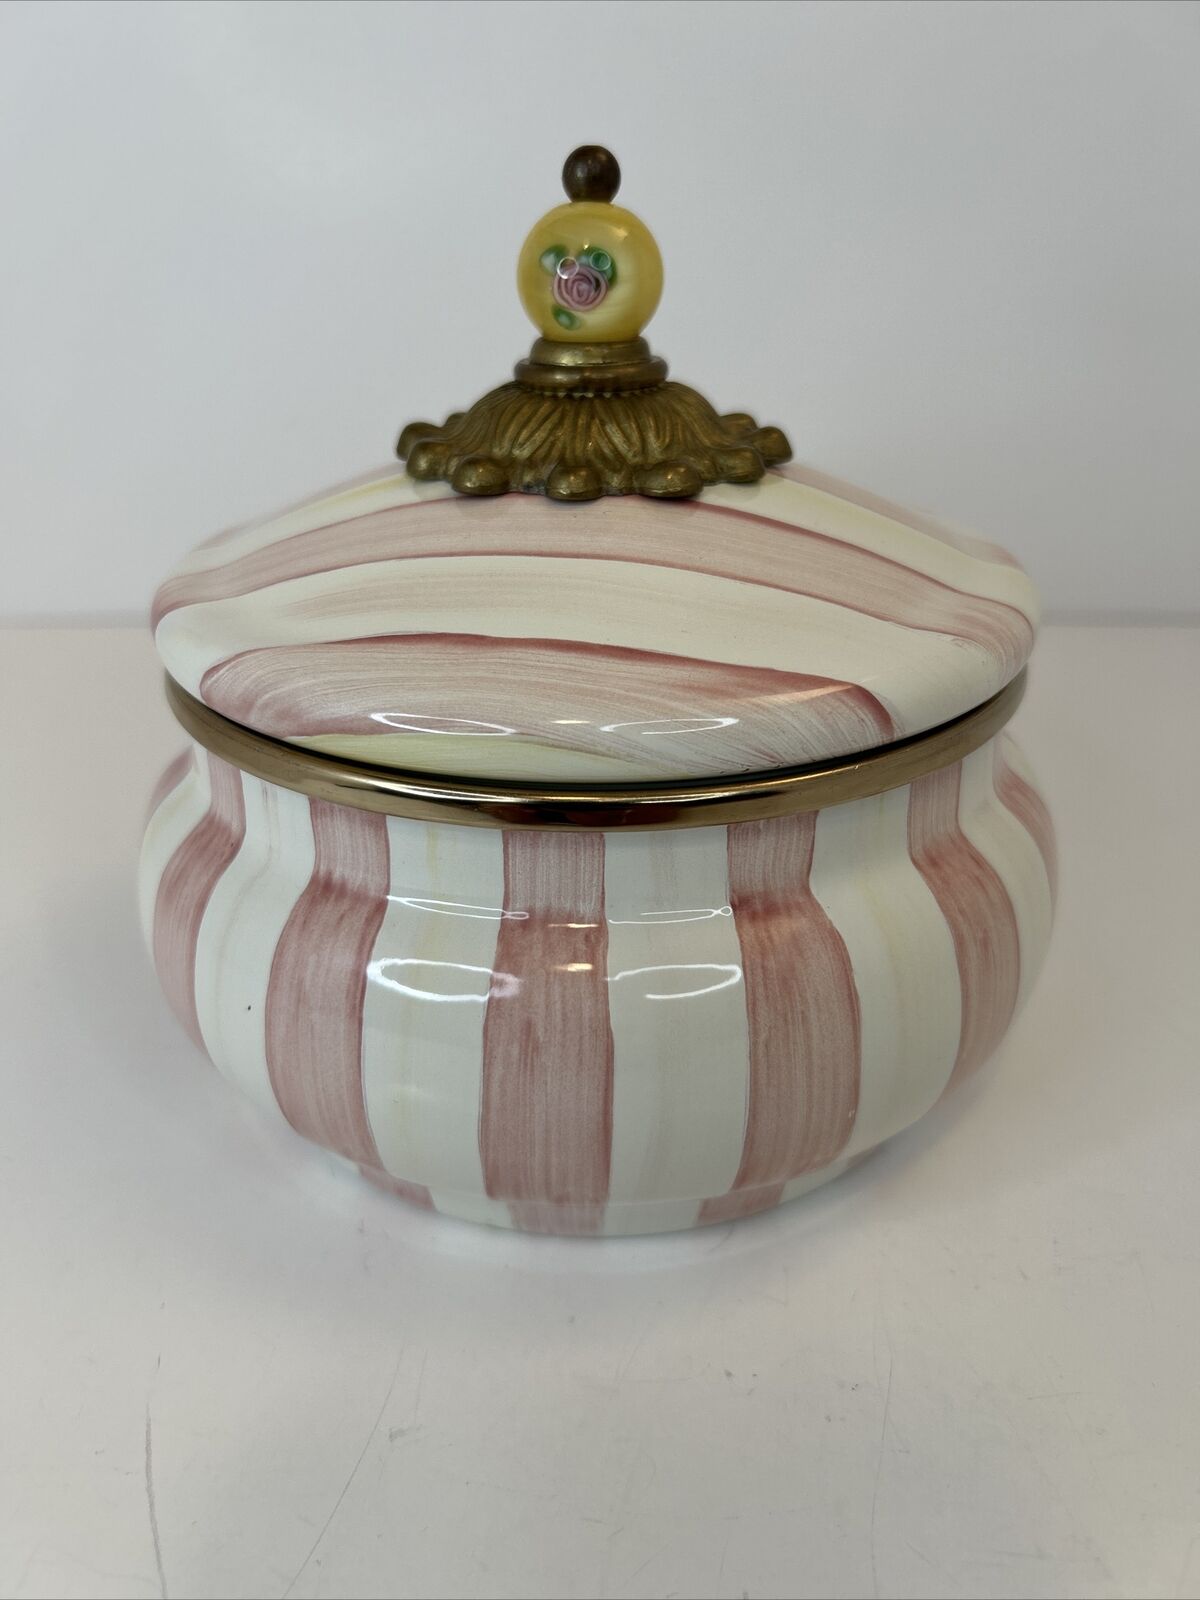 Mackenzie Childs Bathing Hut Squash Pot Canister 5 1/2” Pink/White Striped( D2)